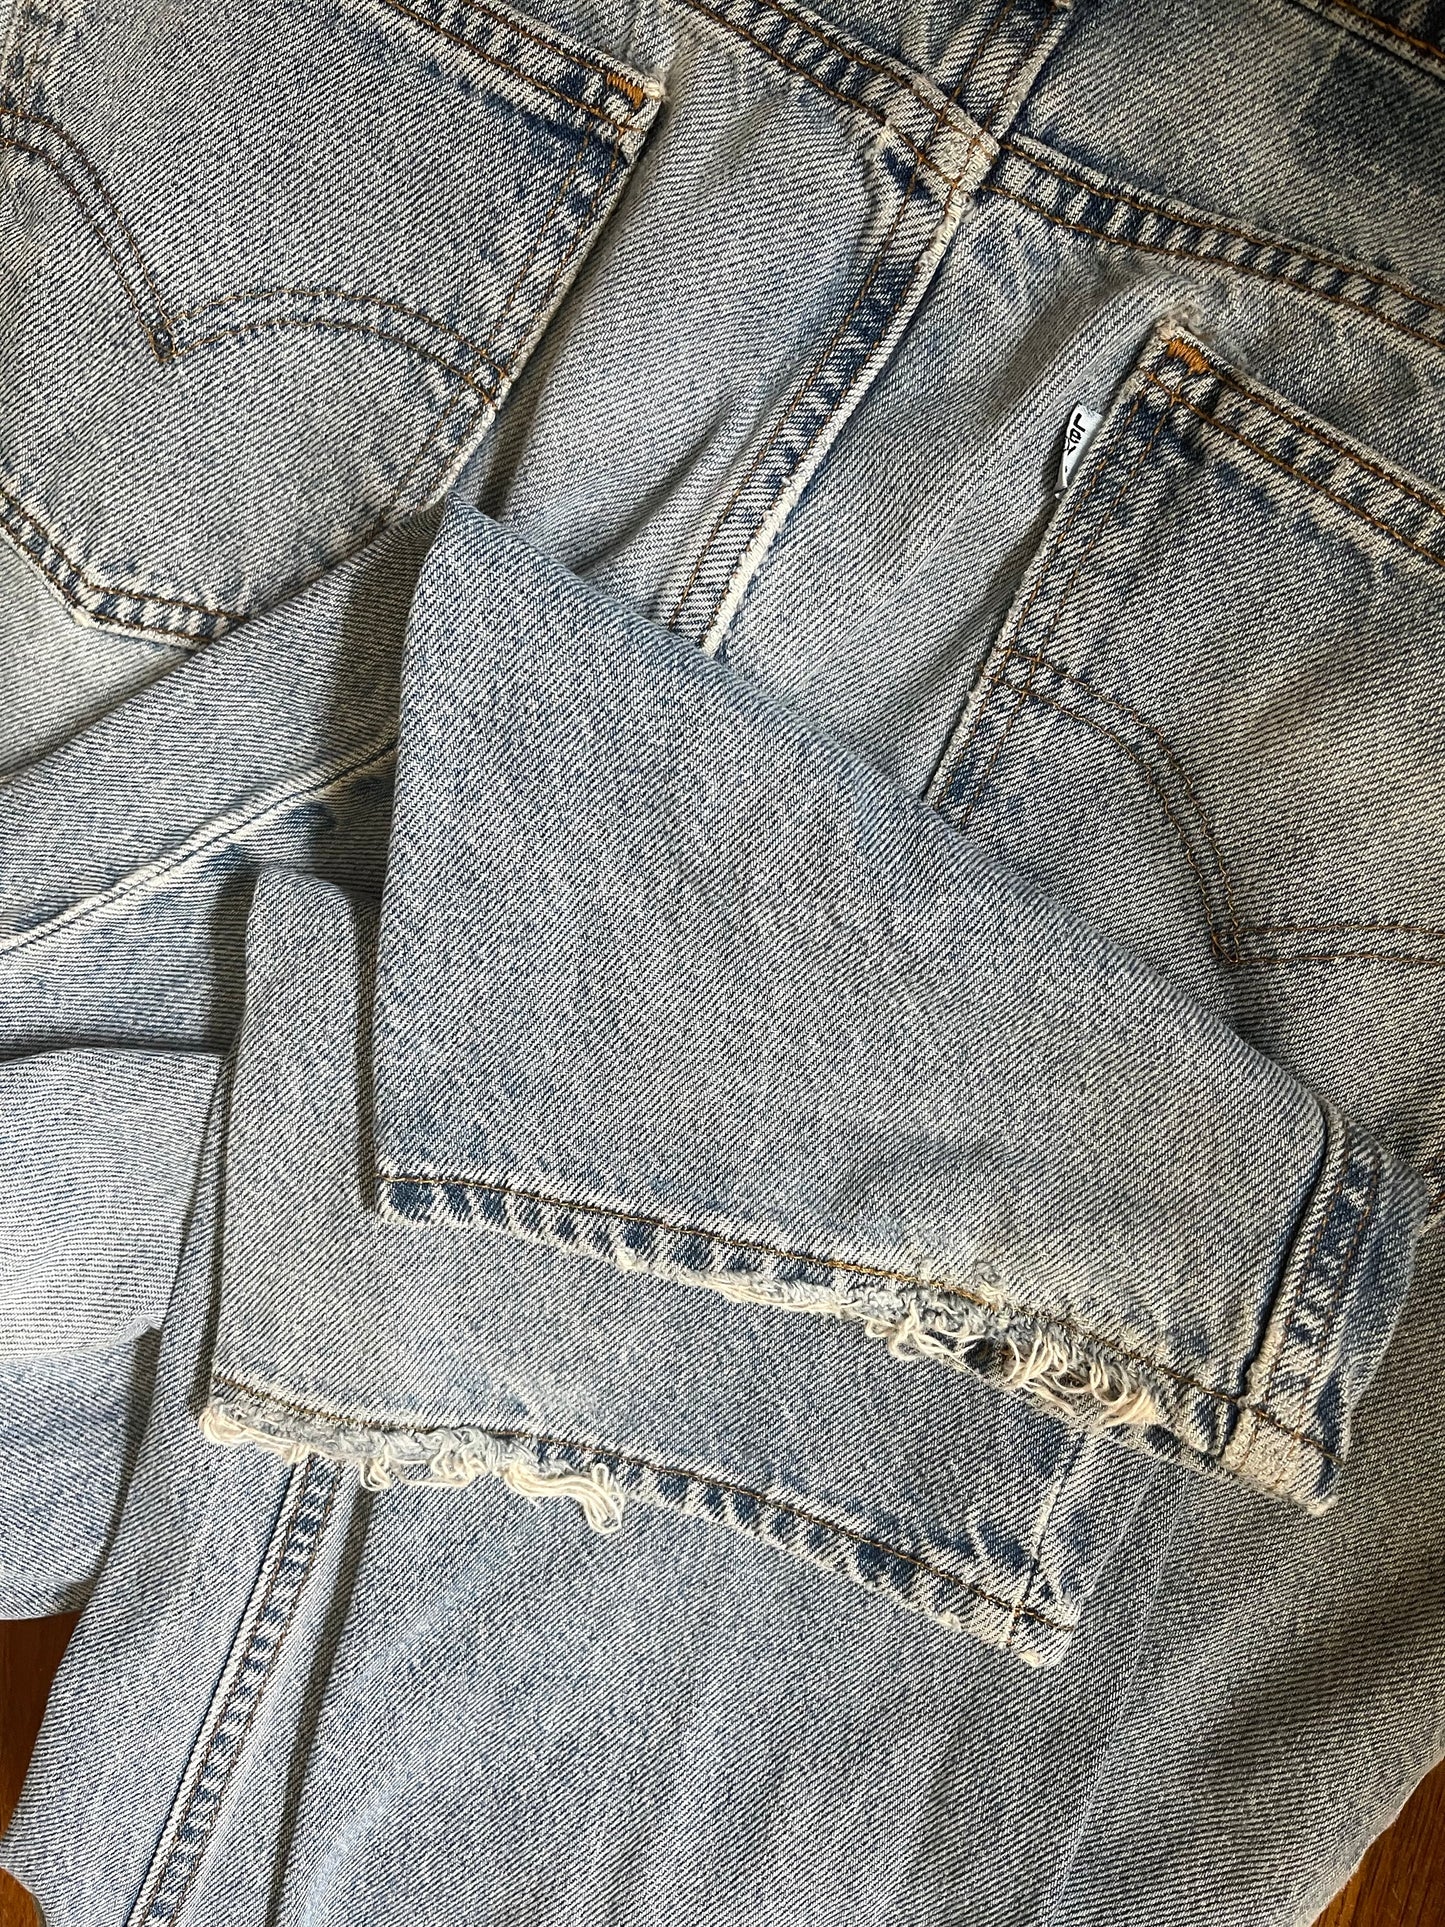 1990s Relaxed Silver Tab Levi’s